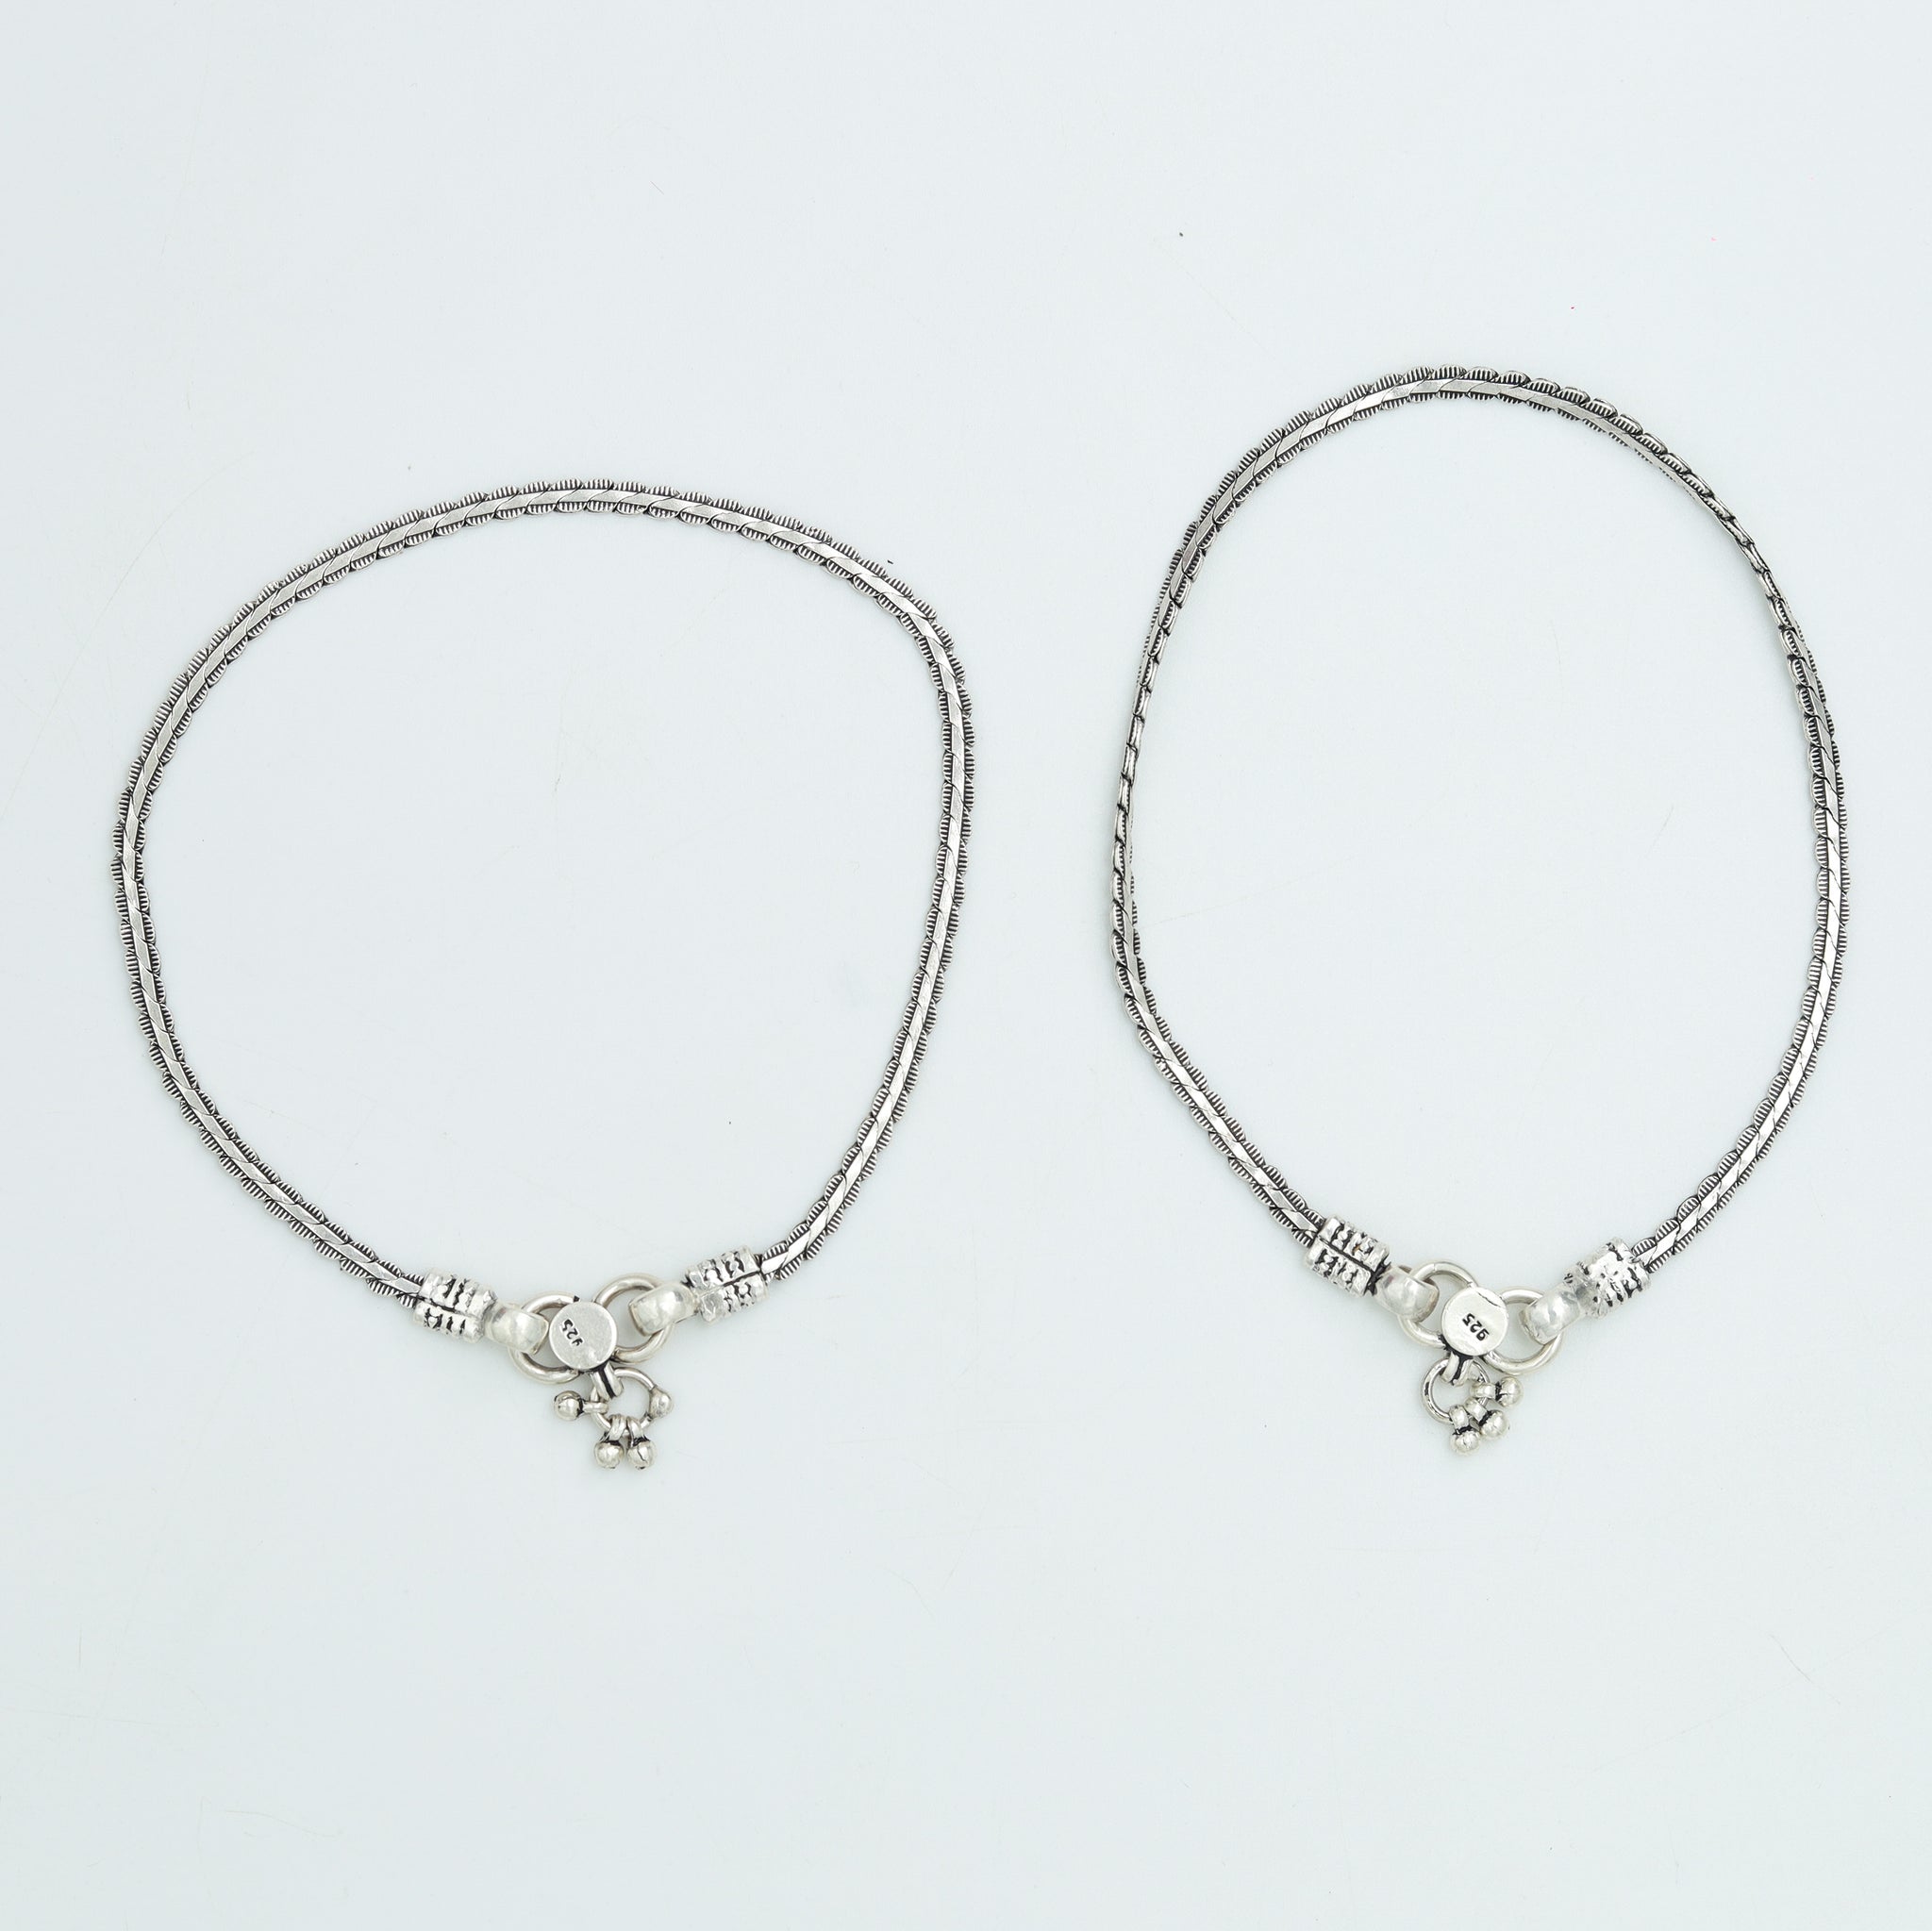 Pure Silver 925 Hallmarked Anklet  14827-1968